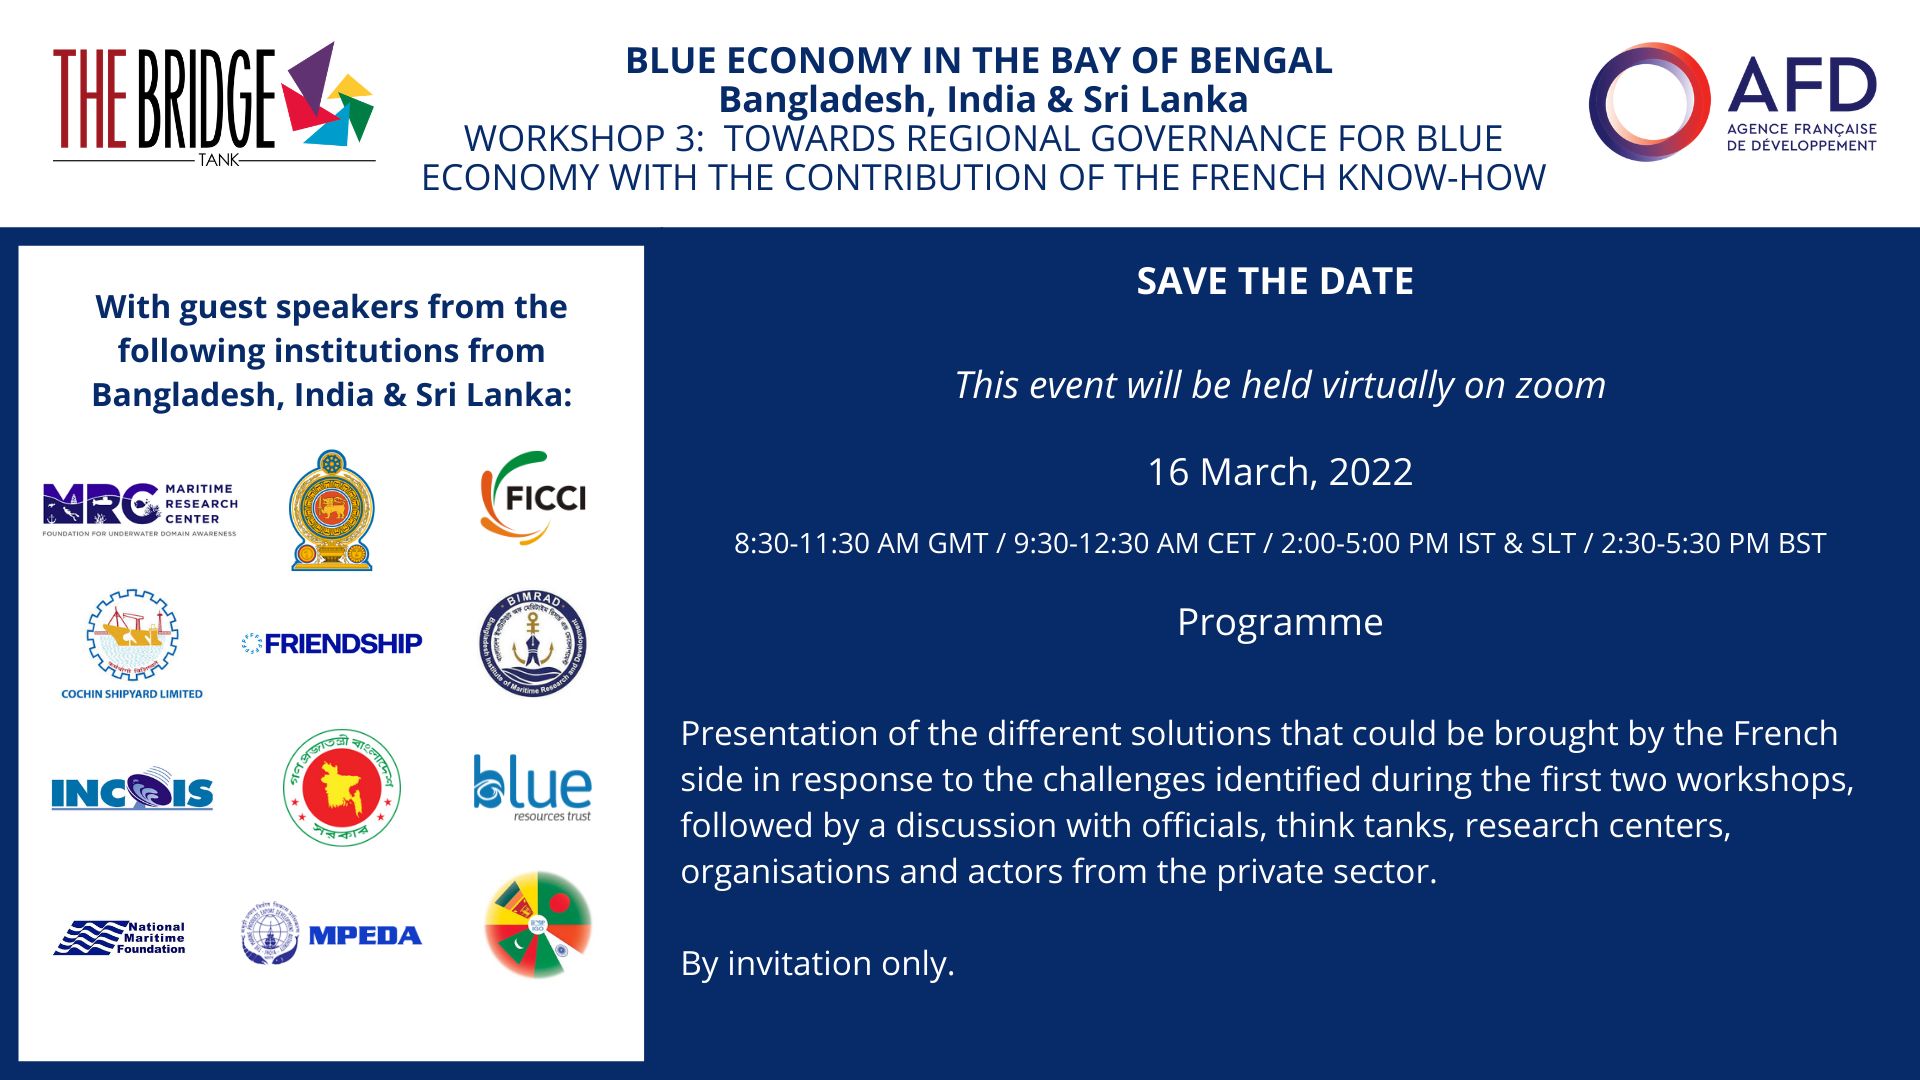 The Bridge Tank and French Development Agency launch their final workshop on Blue Economy